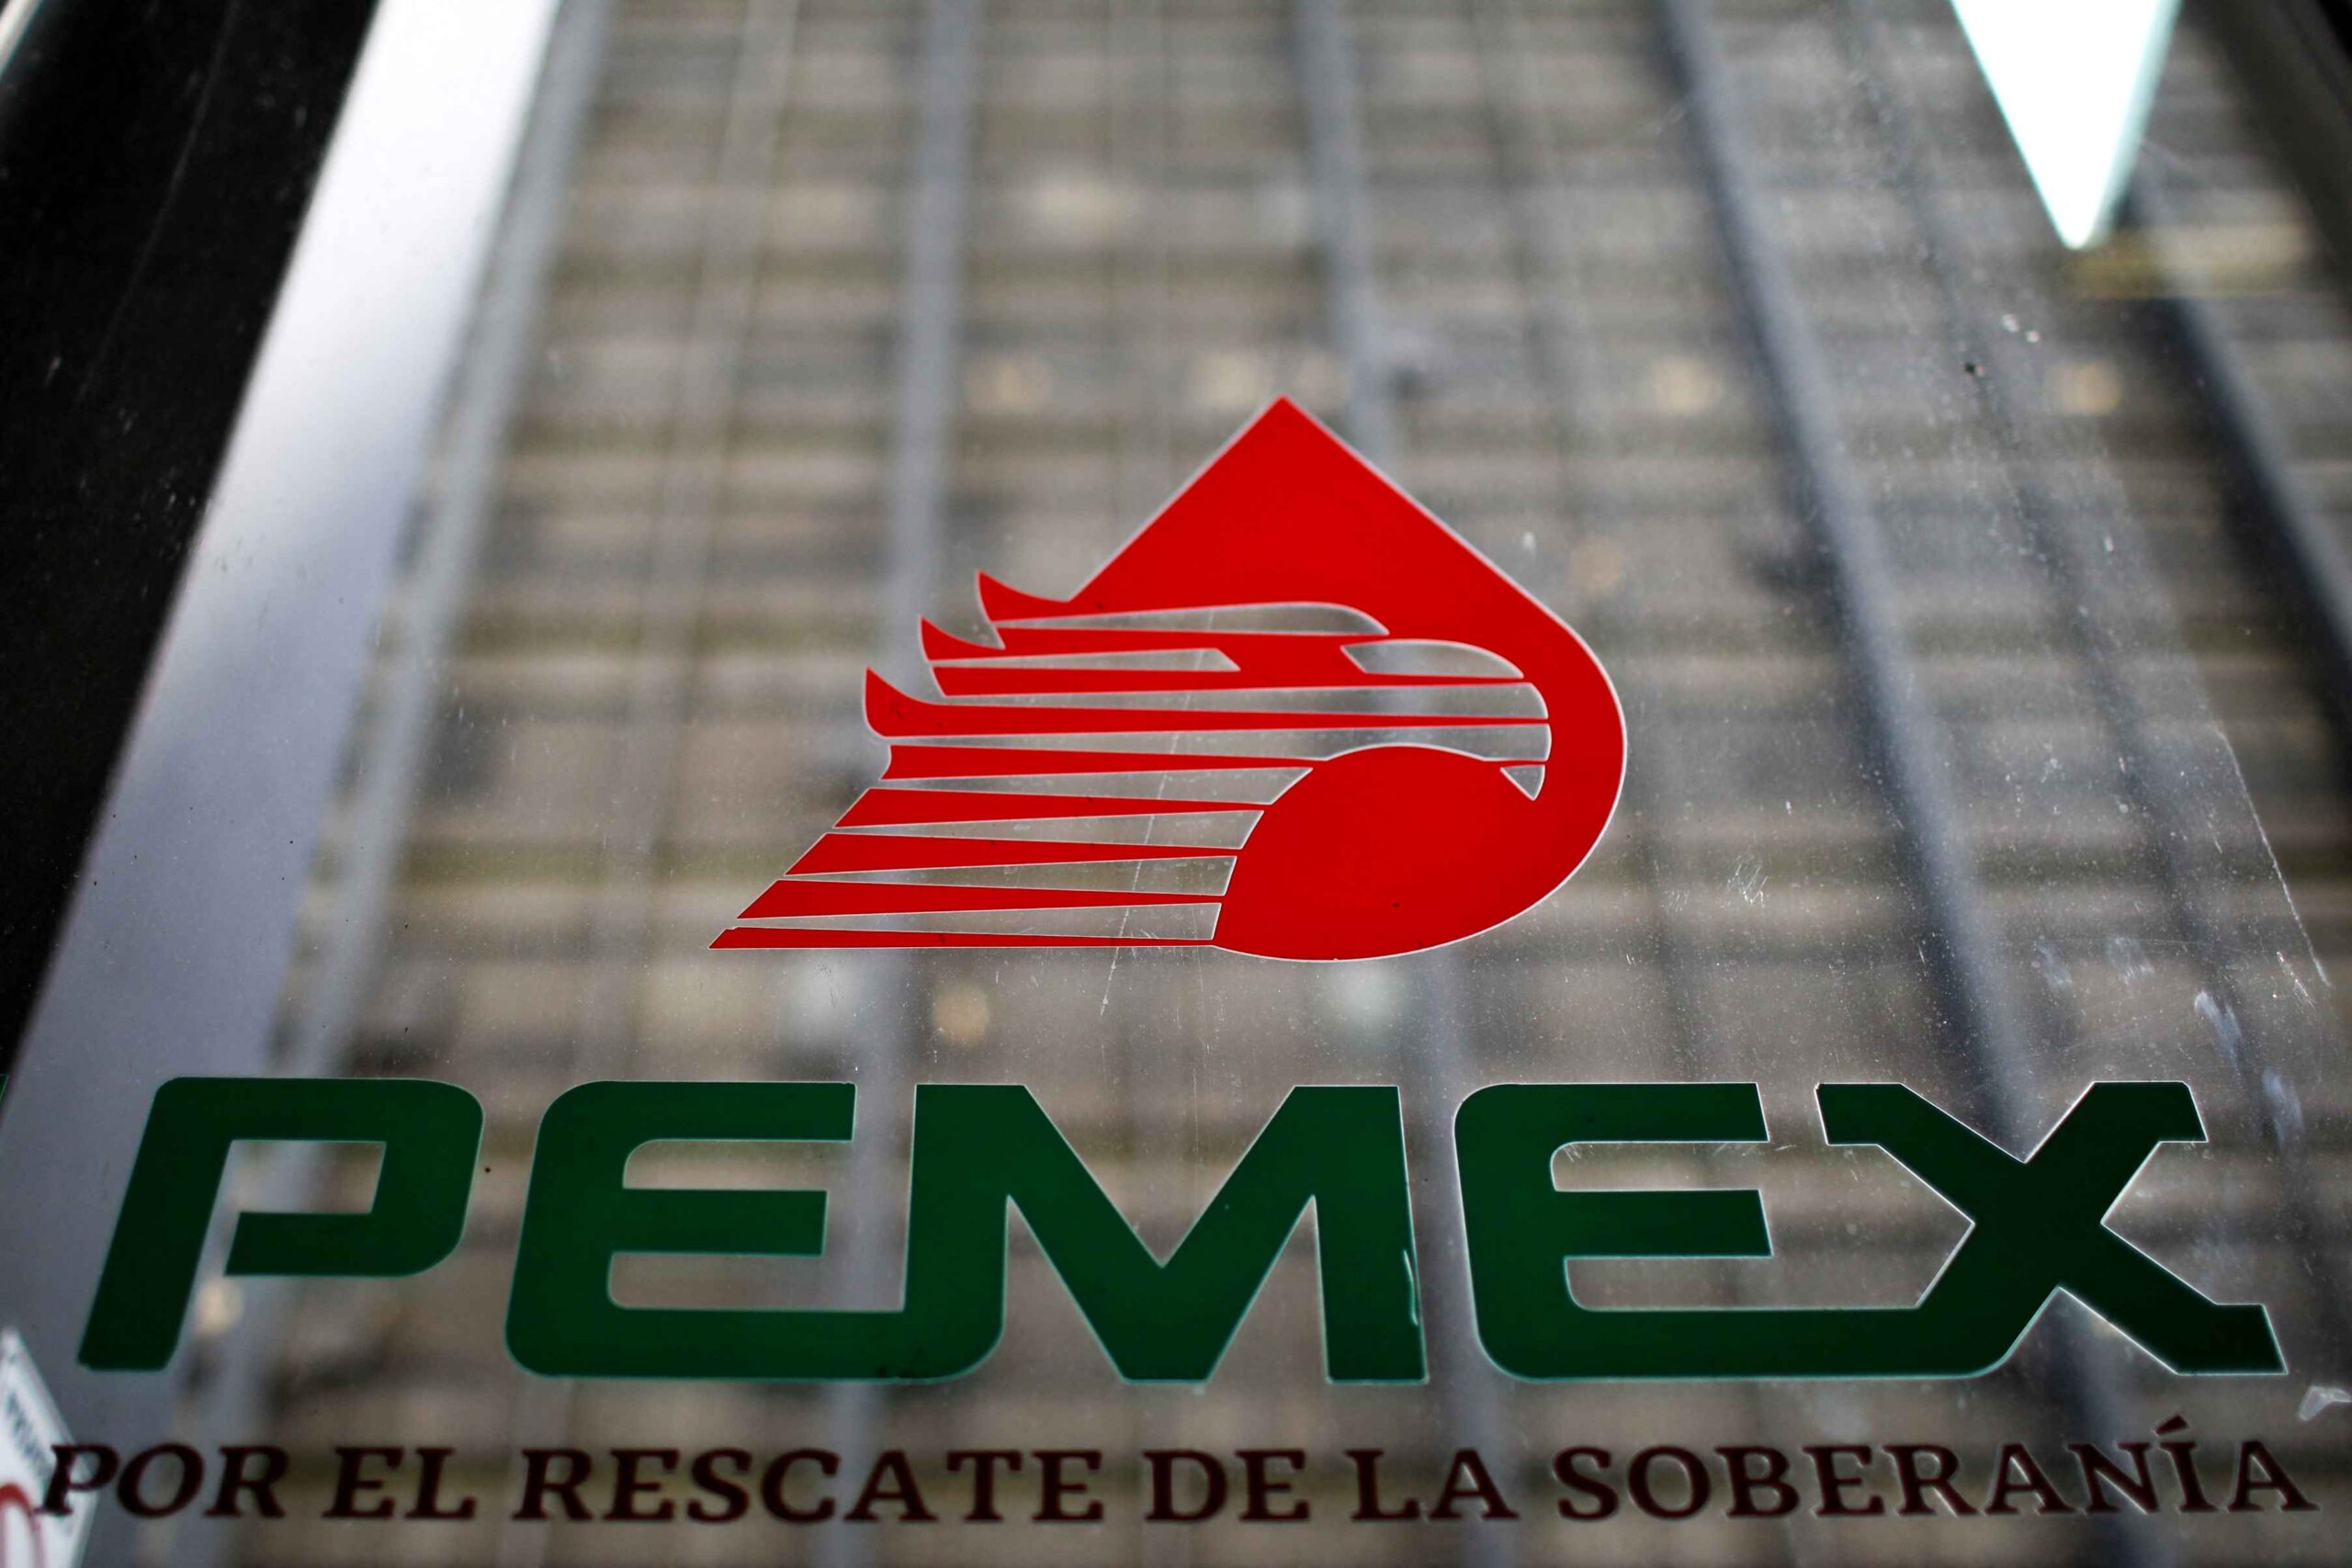 Mexico’s Pemex put off repairs despite vast methane leaks: documents and source 